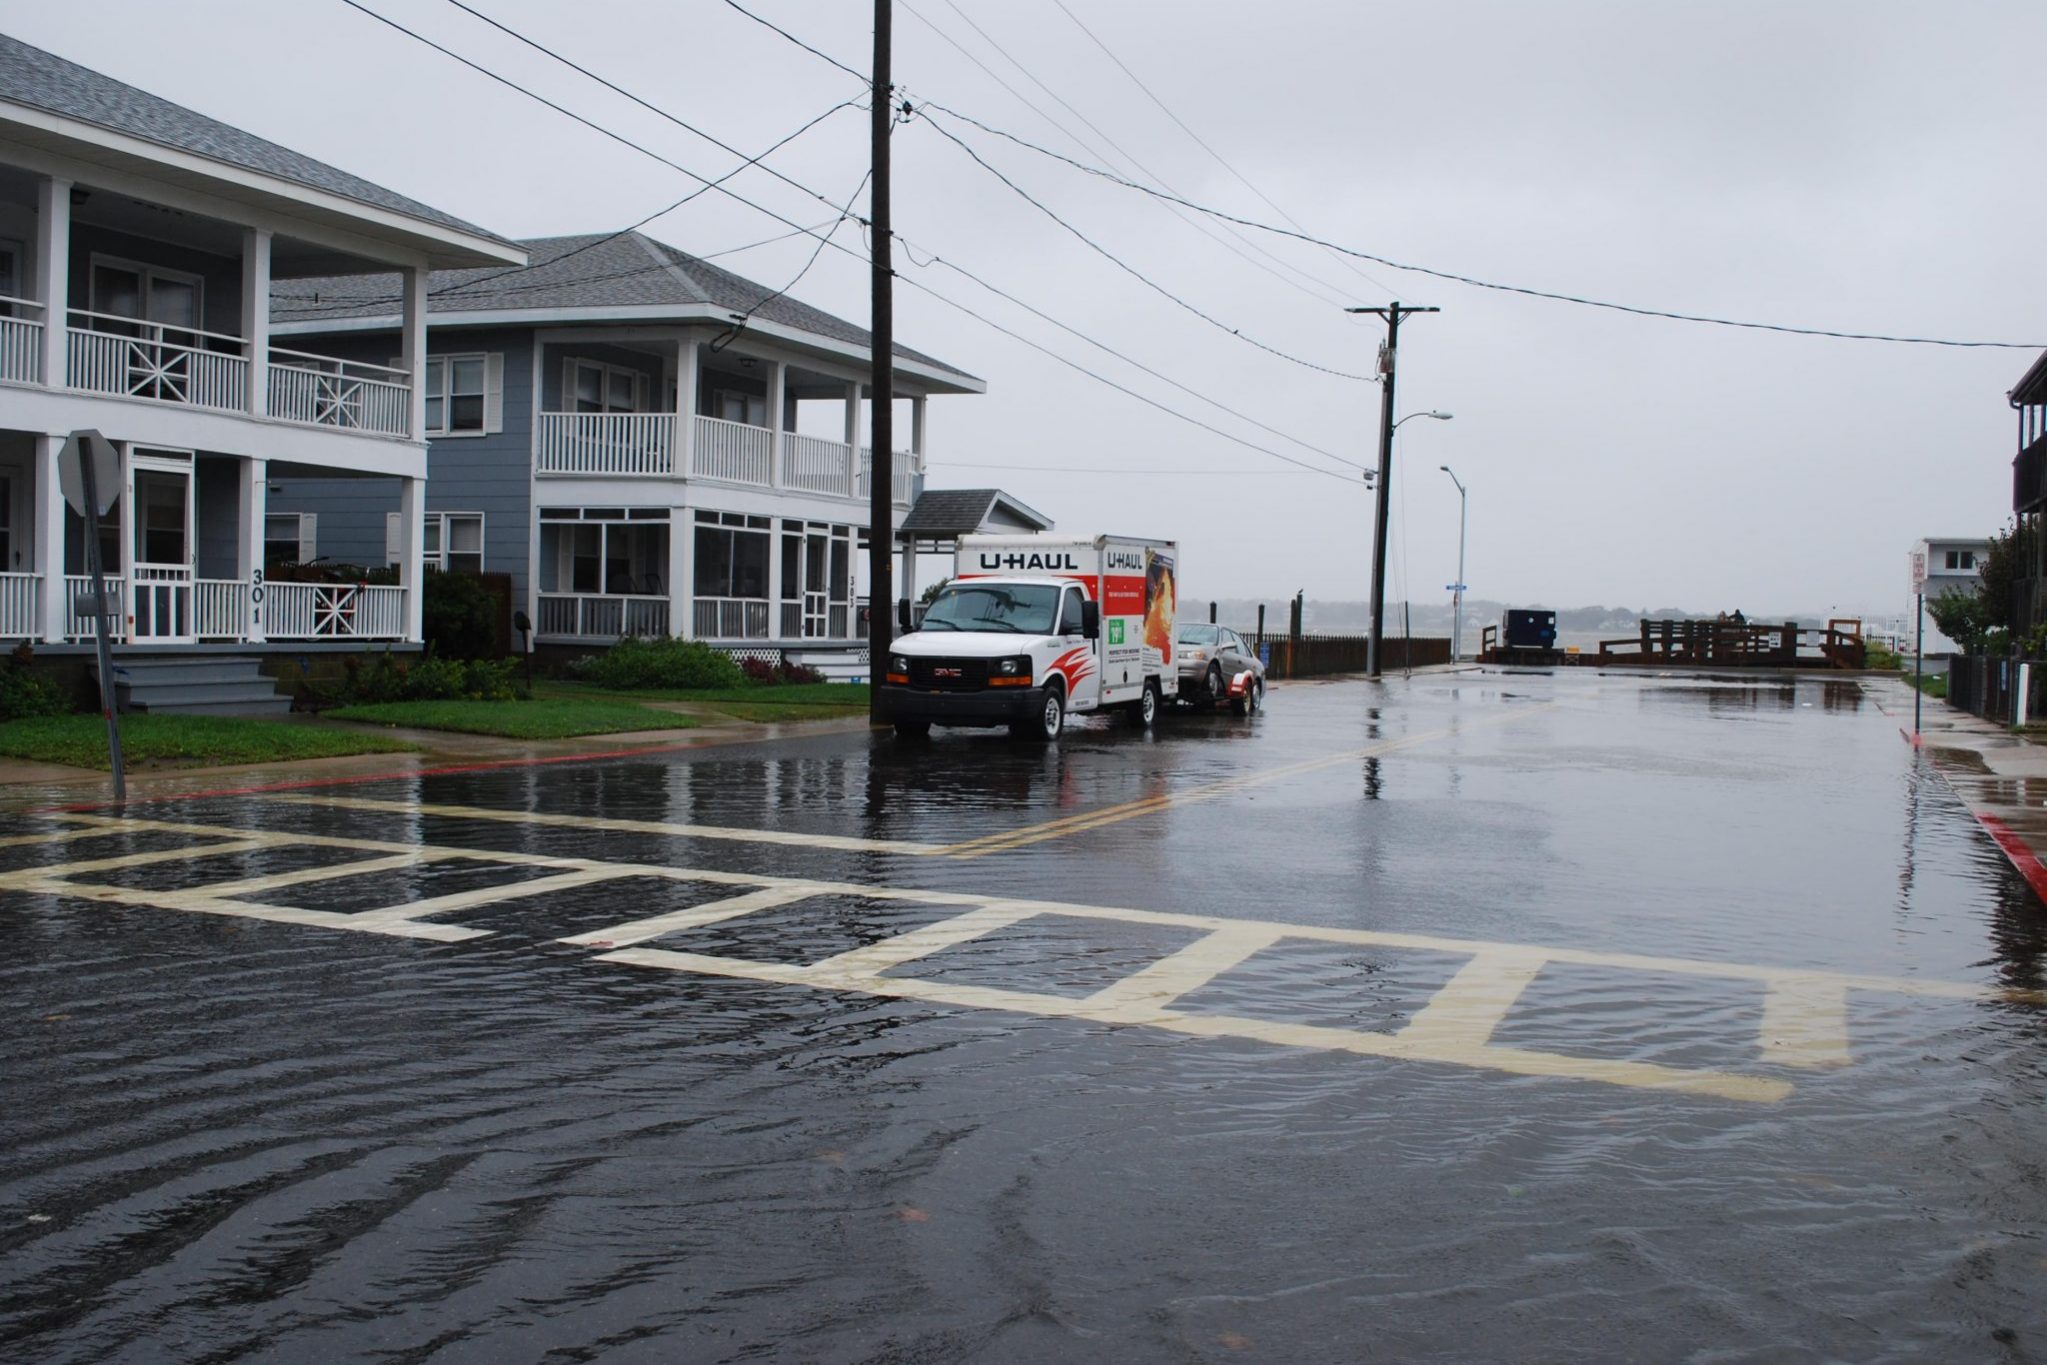 Flooding expected to Continue during Next Several High Tide Cycles